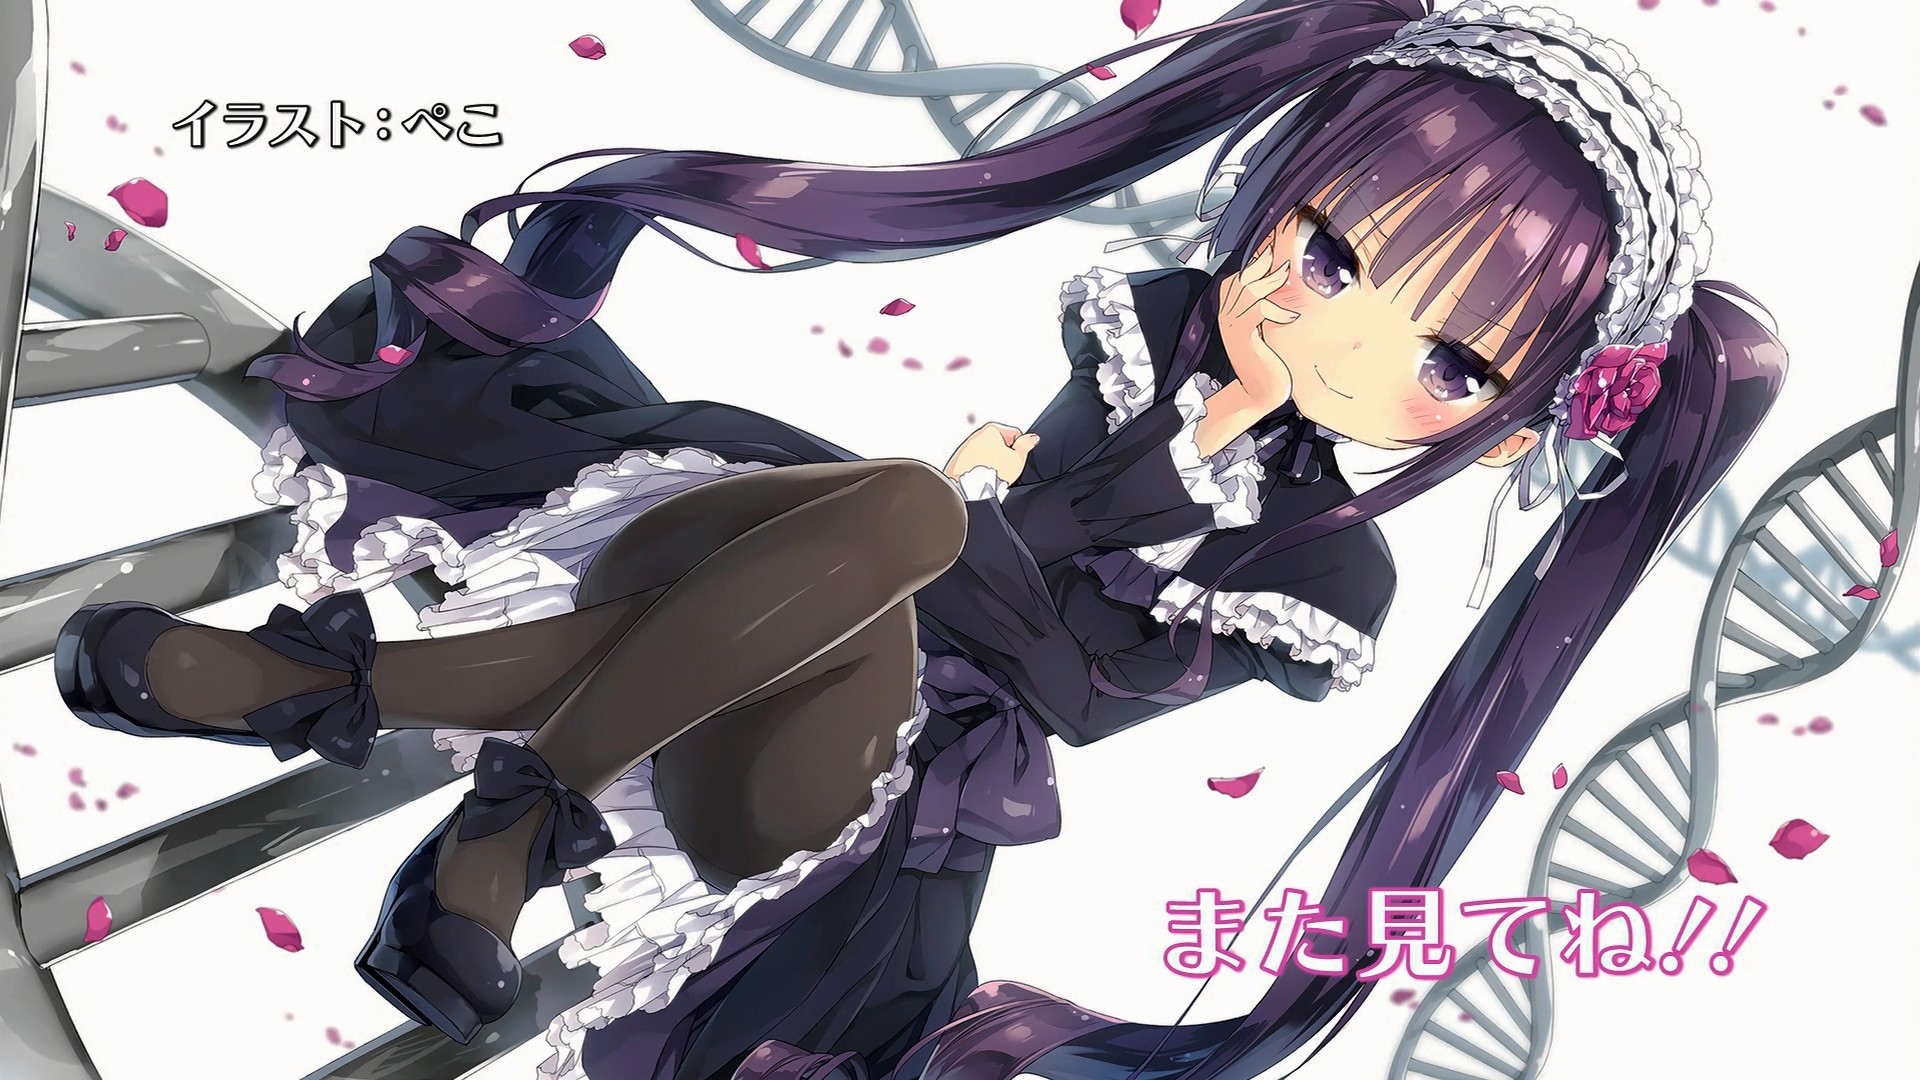 Anime 1920x1080 anime anime girls Absolute Duo  long hair dress loli lolita fashion petals twintails legs legs crossed smiling pantyhose white background purple hair maid maid outfit